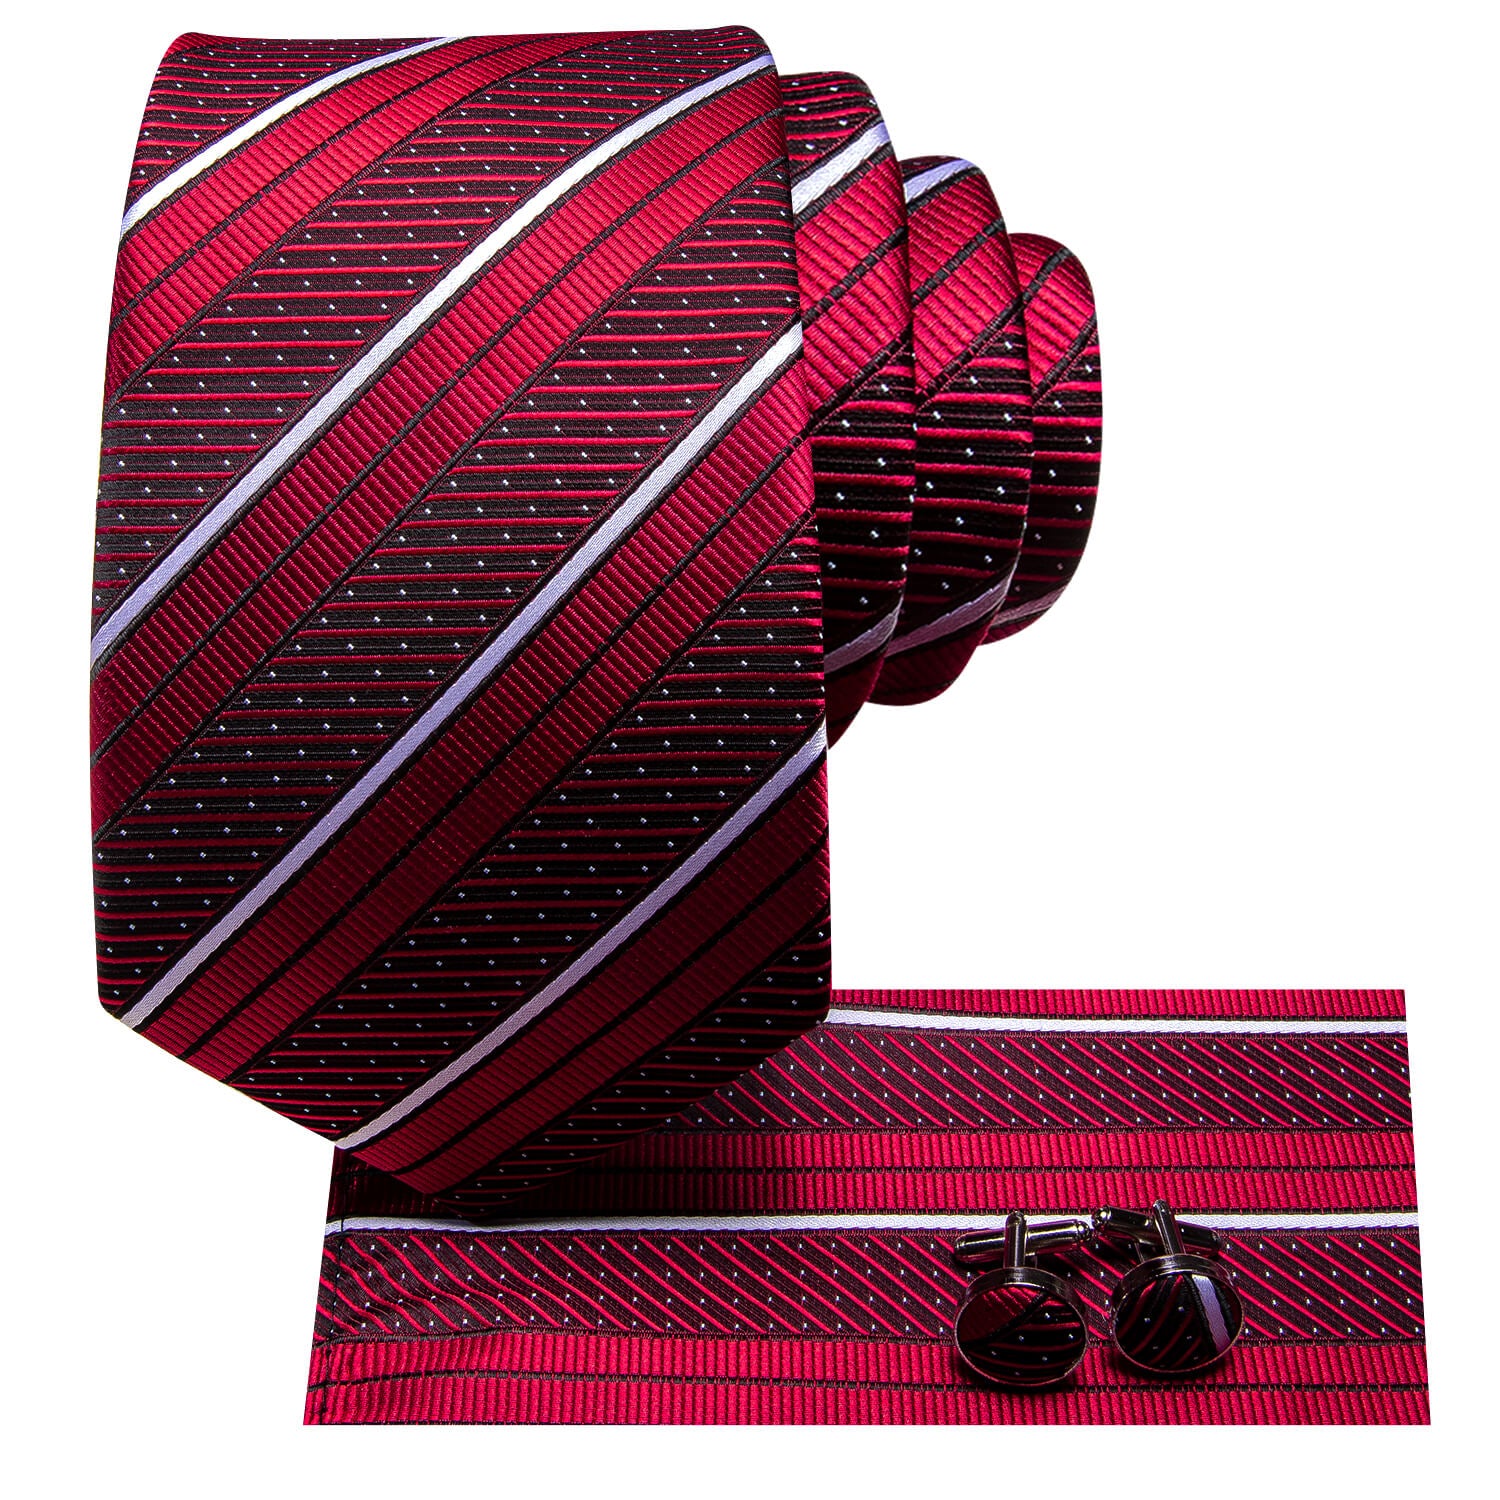 Red Tie with White Stripes Pocket Square Cufflinks Set